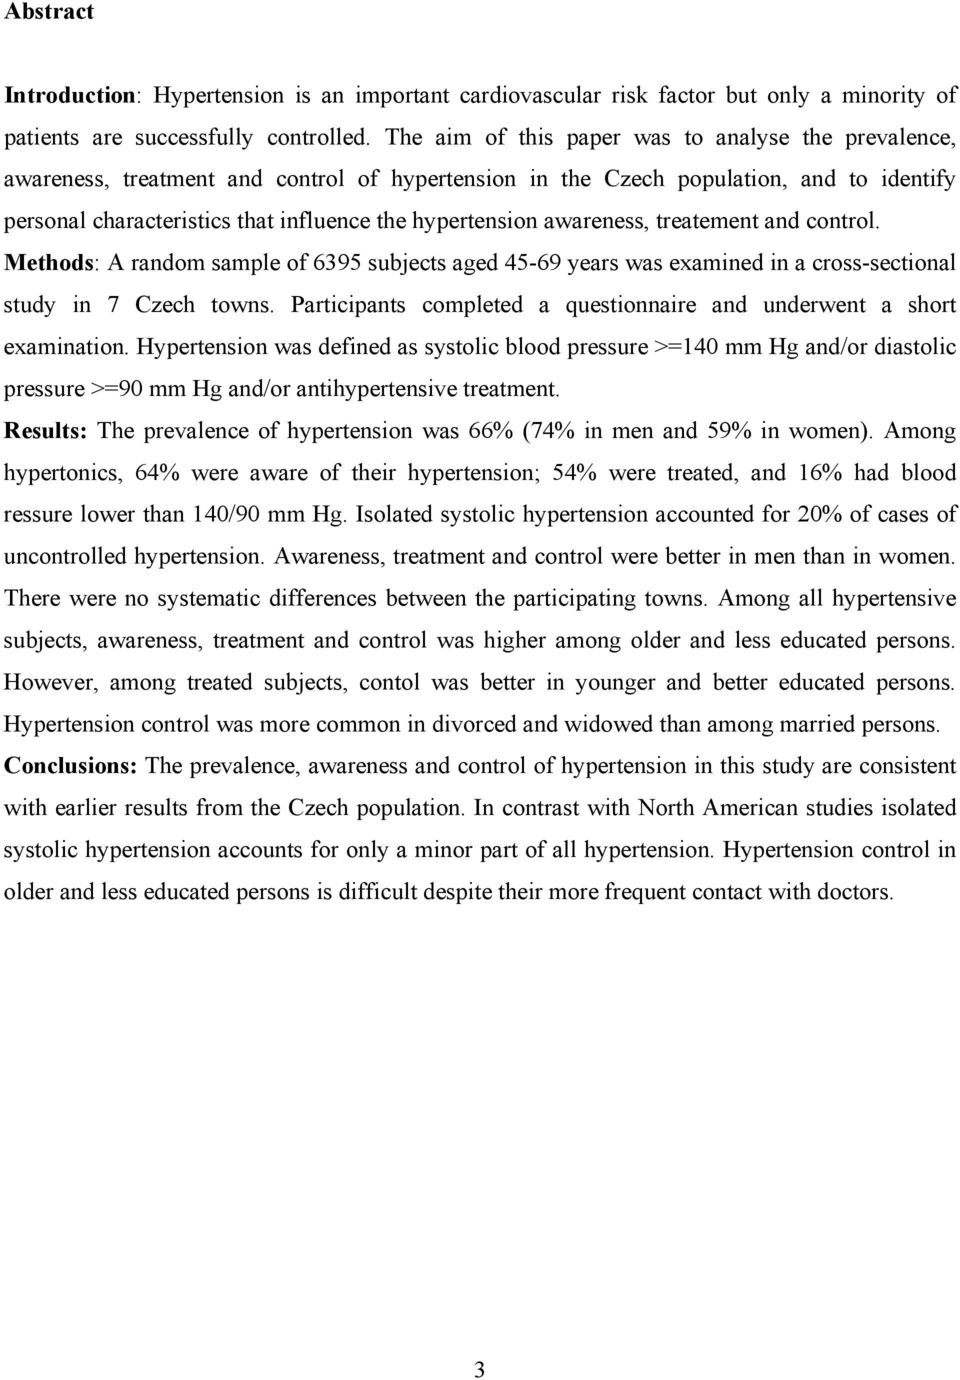 awareness, treatement and control. Methods: A random sample of 6395 subjects aged 45-69 years was examined in a cross-sectional study in 7 Czech towns.